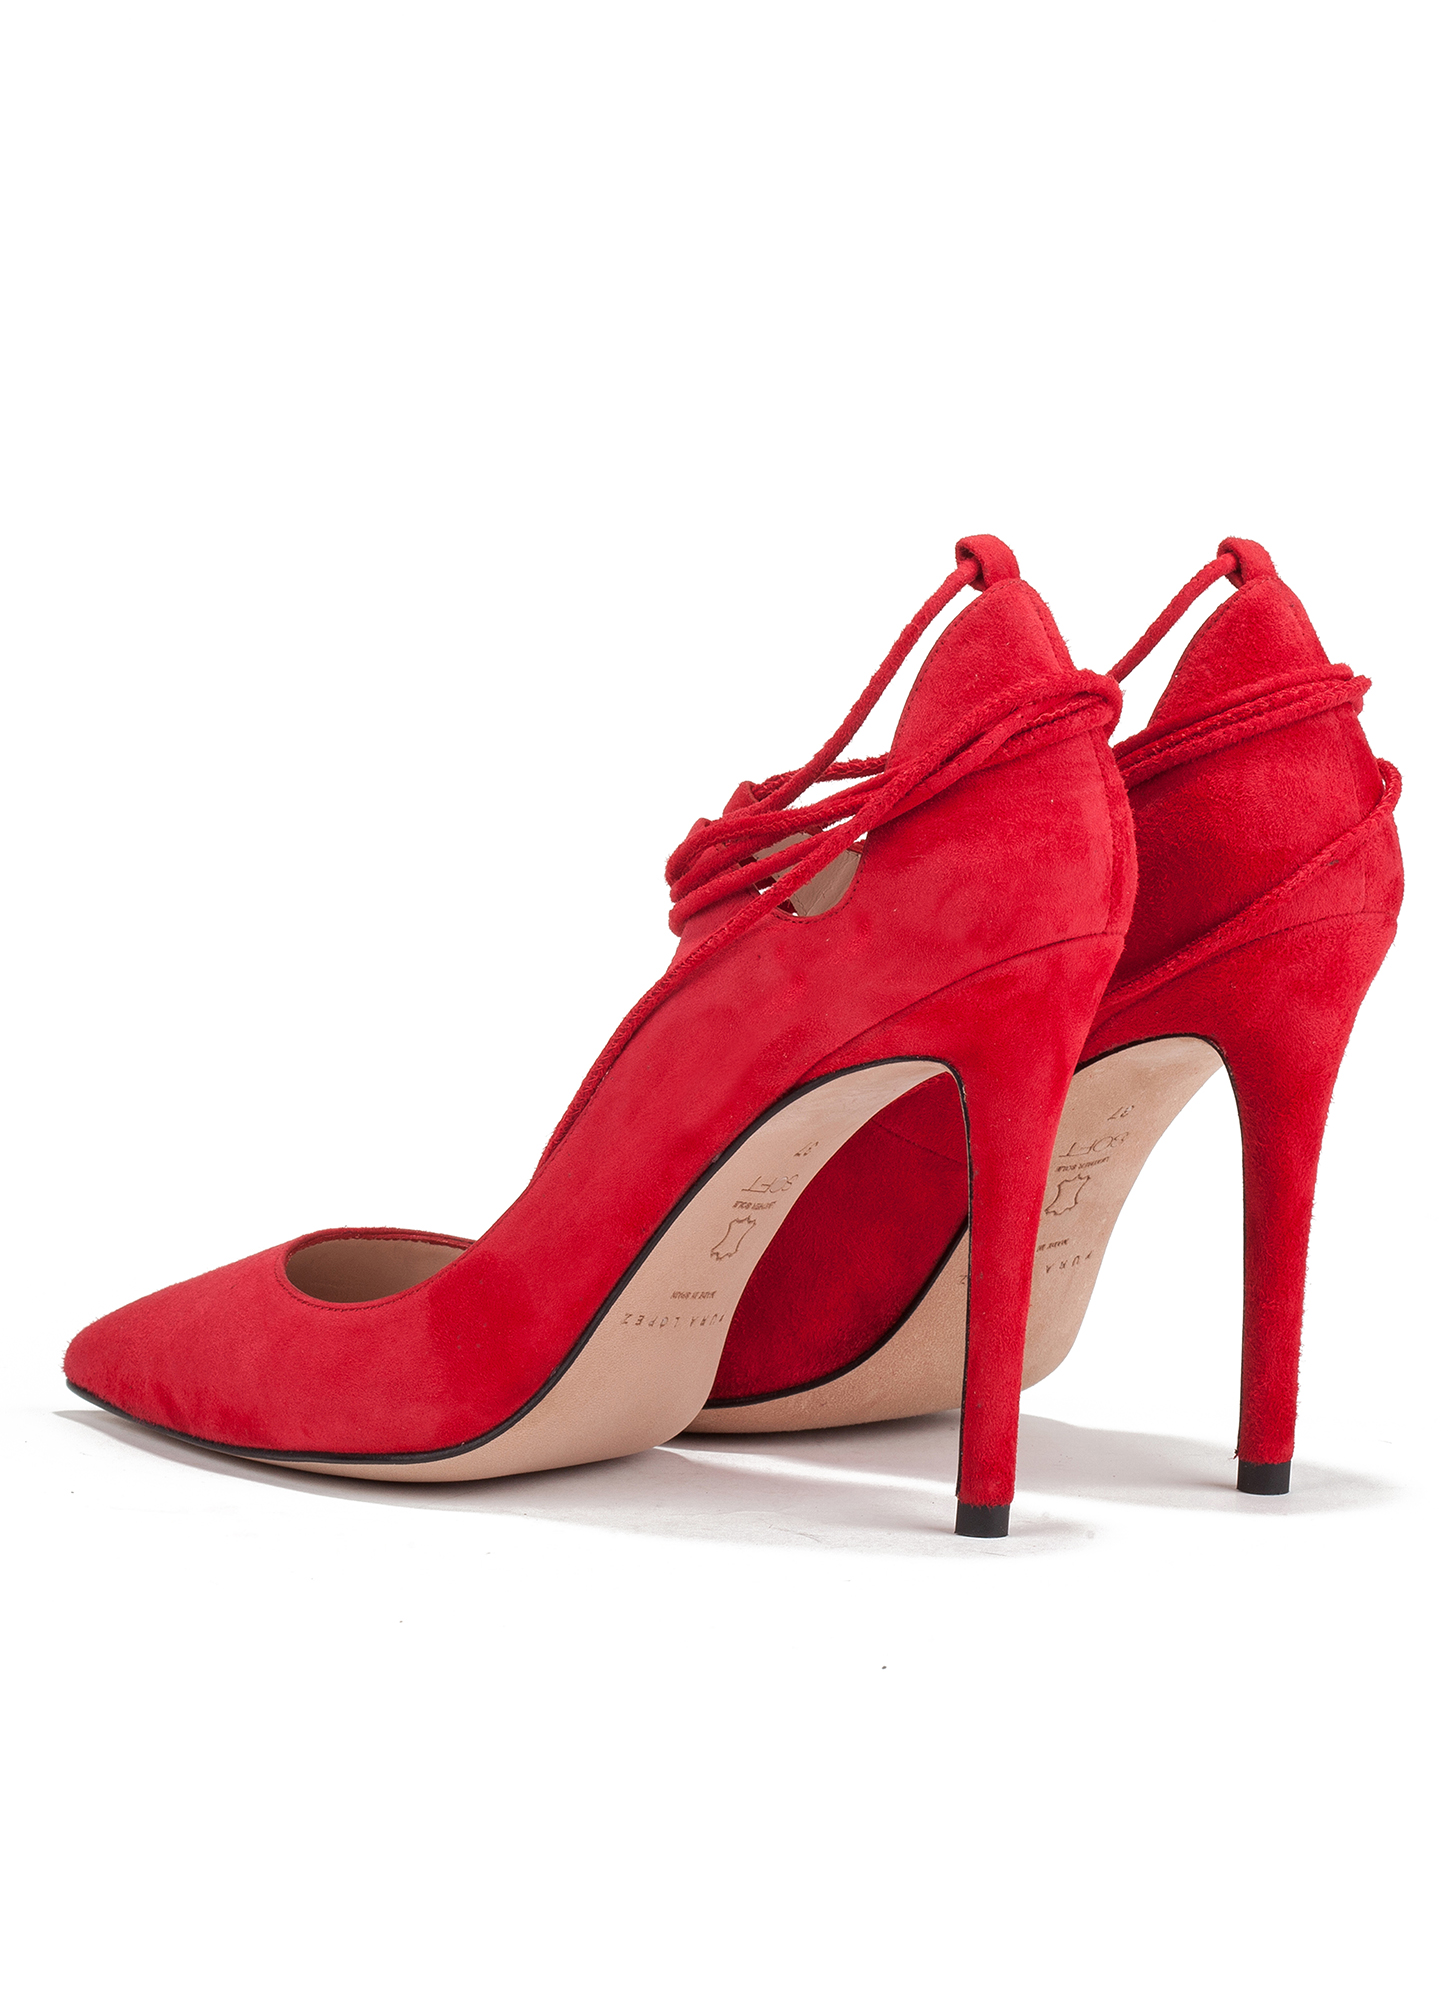 Lace up high heel pumps in red suede - online shoe store Pura Lopez ...